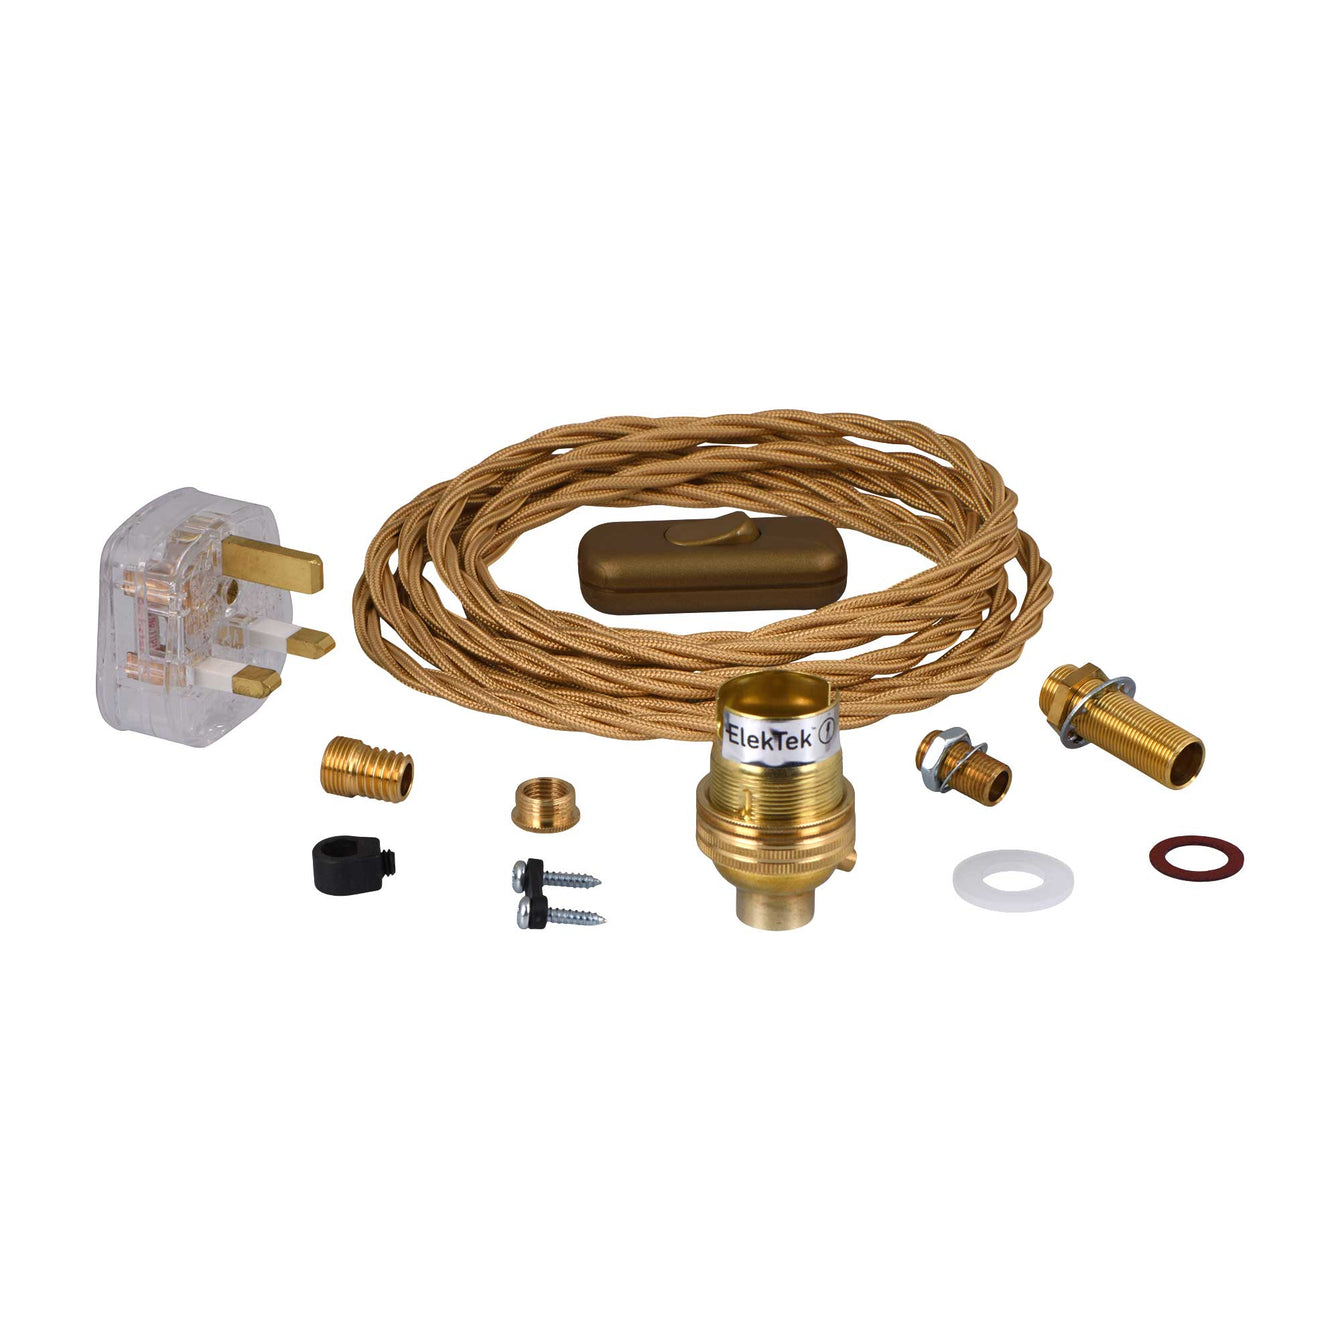 ElekTek Premium Lamp Kit Brass Unswitched B22 Lamp Holder with Gold Flex and 3A UK Plug - Buy It Better 